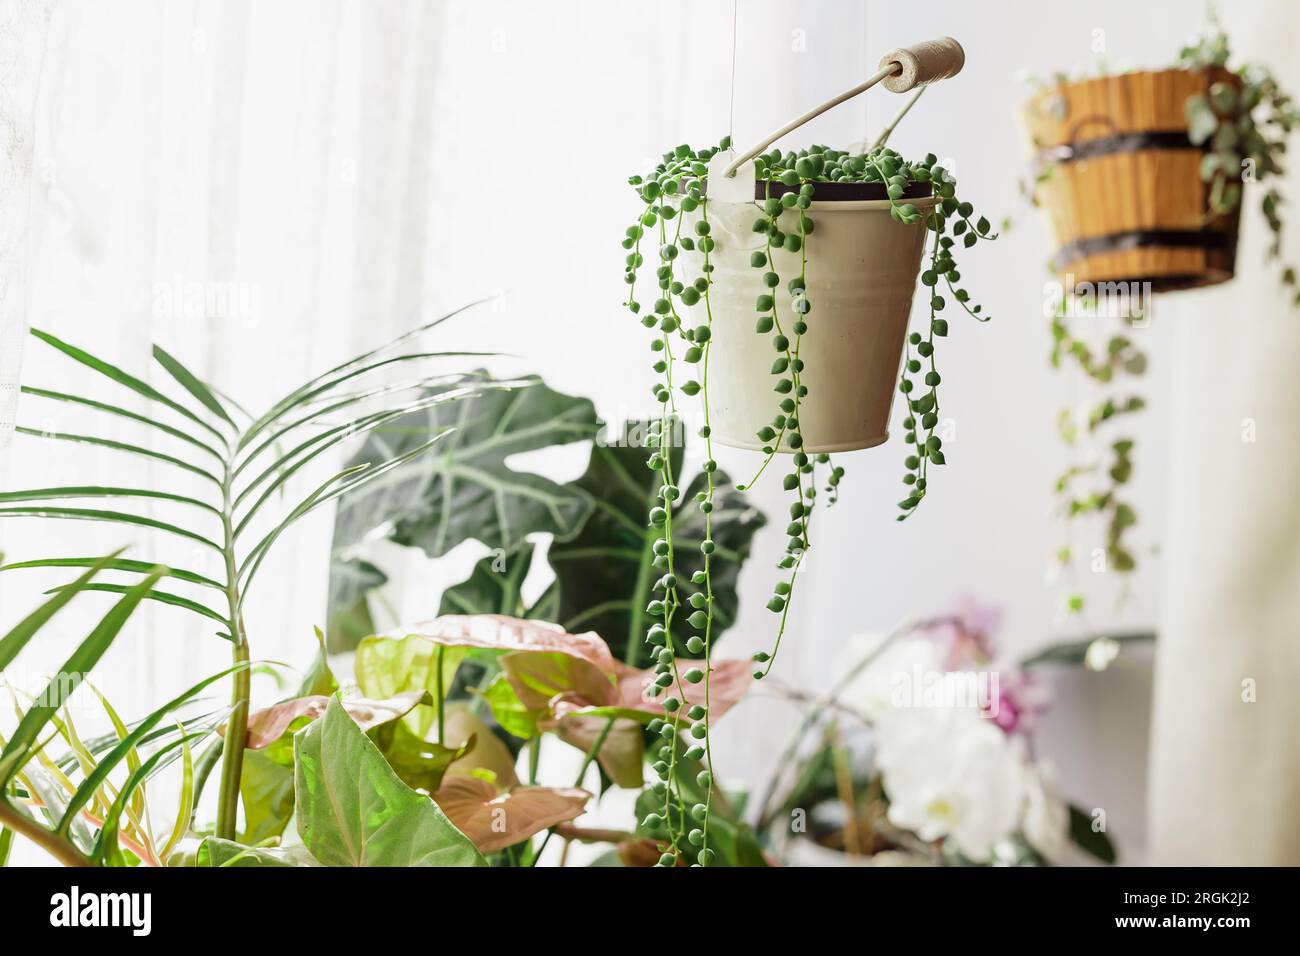 Different Exotic Plants at Window Sill. Senecio Rowleyanus House Plant in a White Hanging Bucket Pot. String of Pearls, String of Hearts in Hanging Po Stock Photo